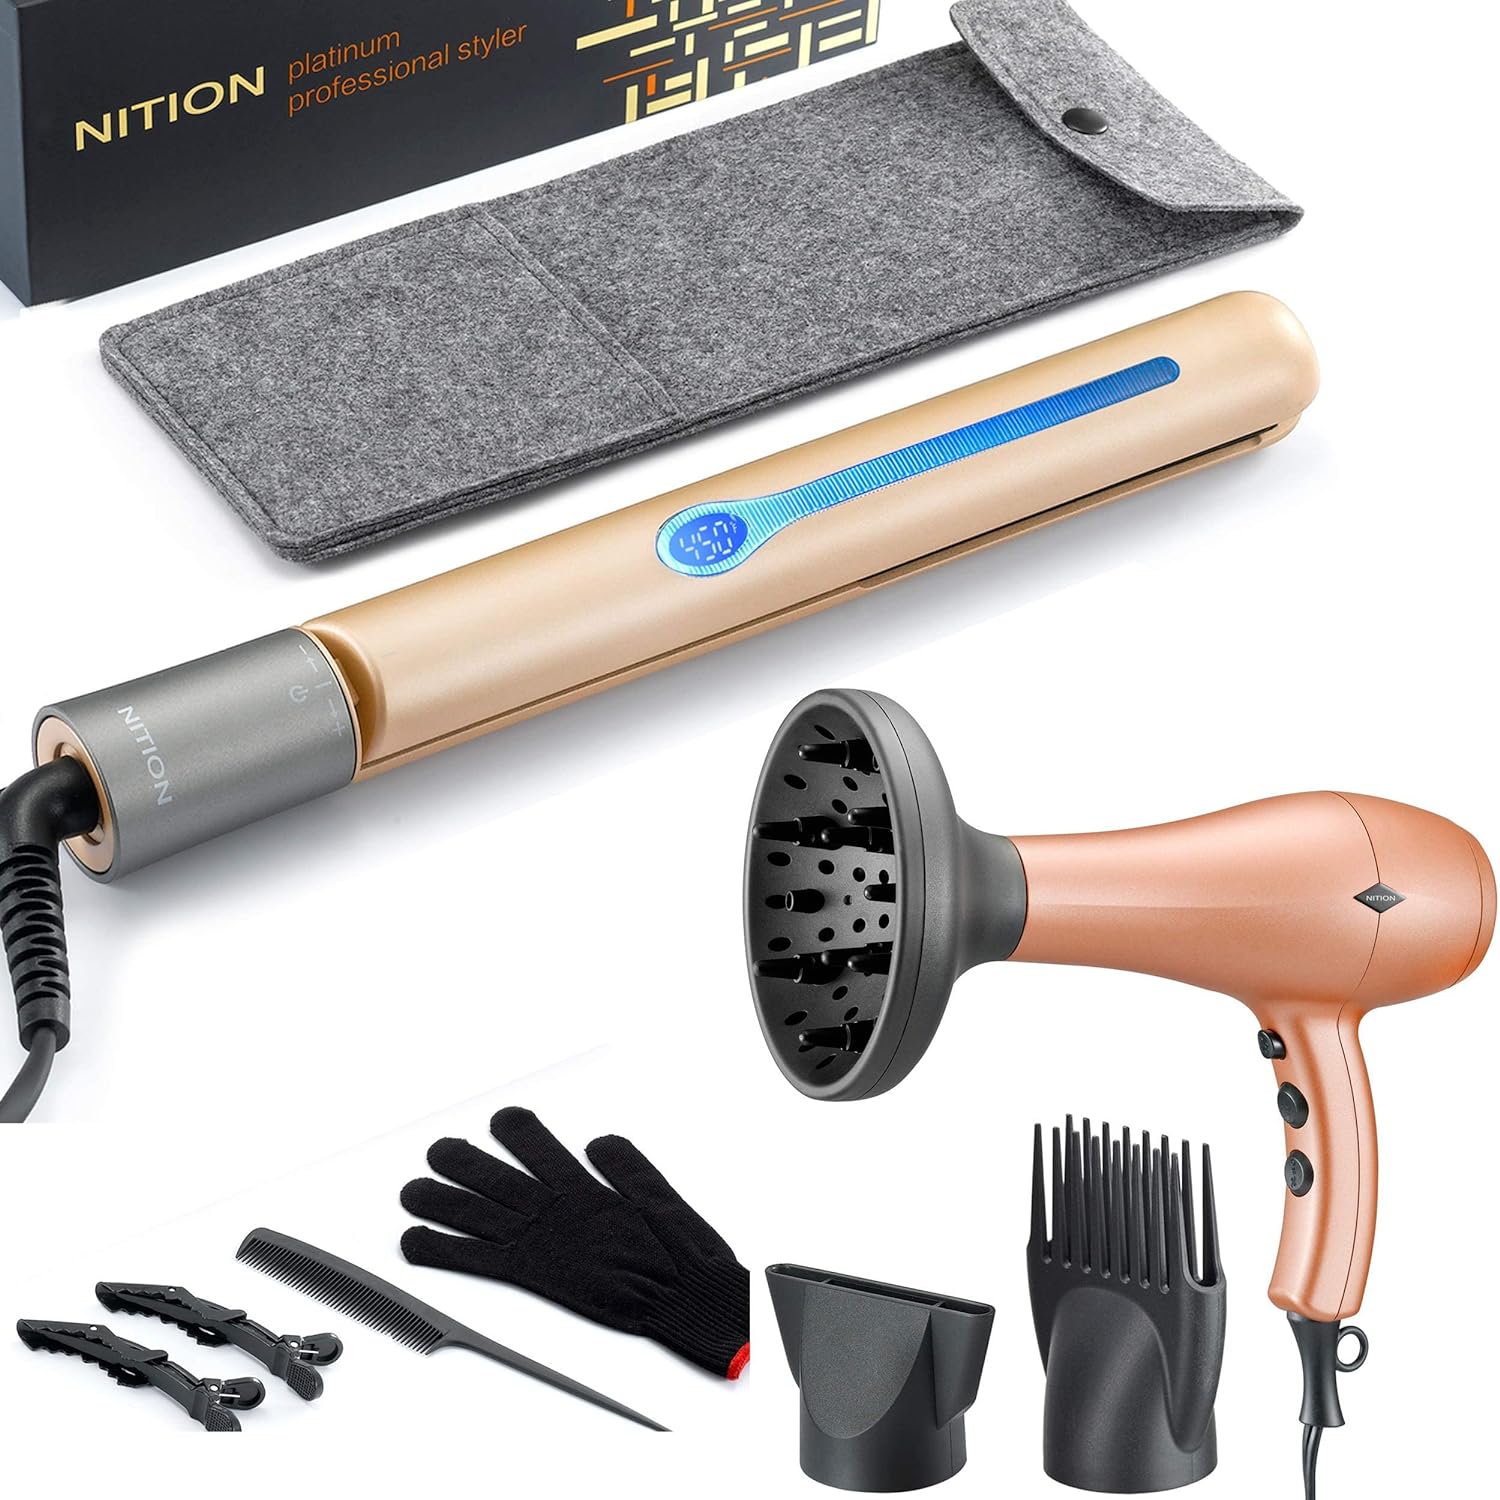 NITION Pro Salon Hair Flat Iron Styling Tool Hair Straightener and Hair Dryer with Diffuser/Comb Set